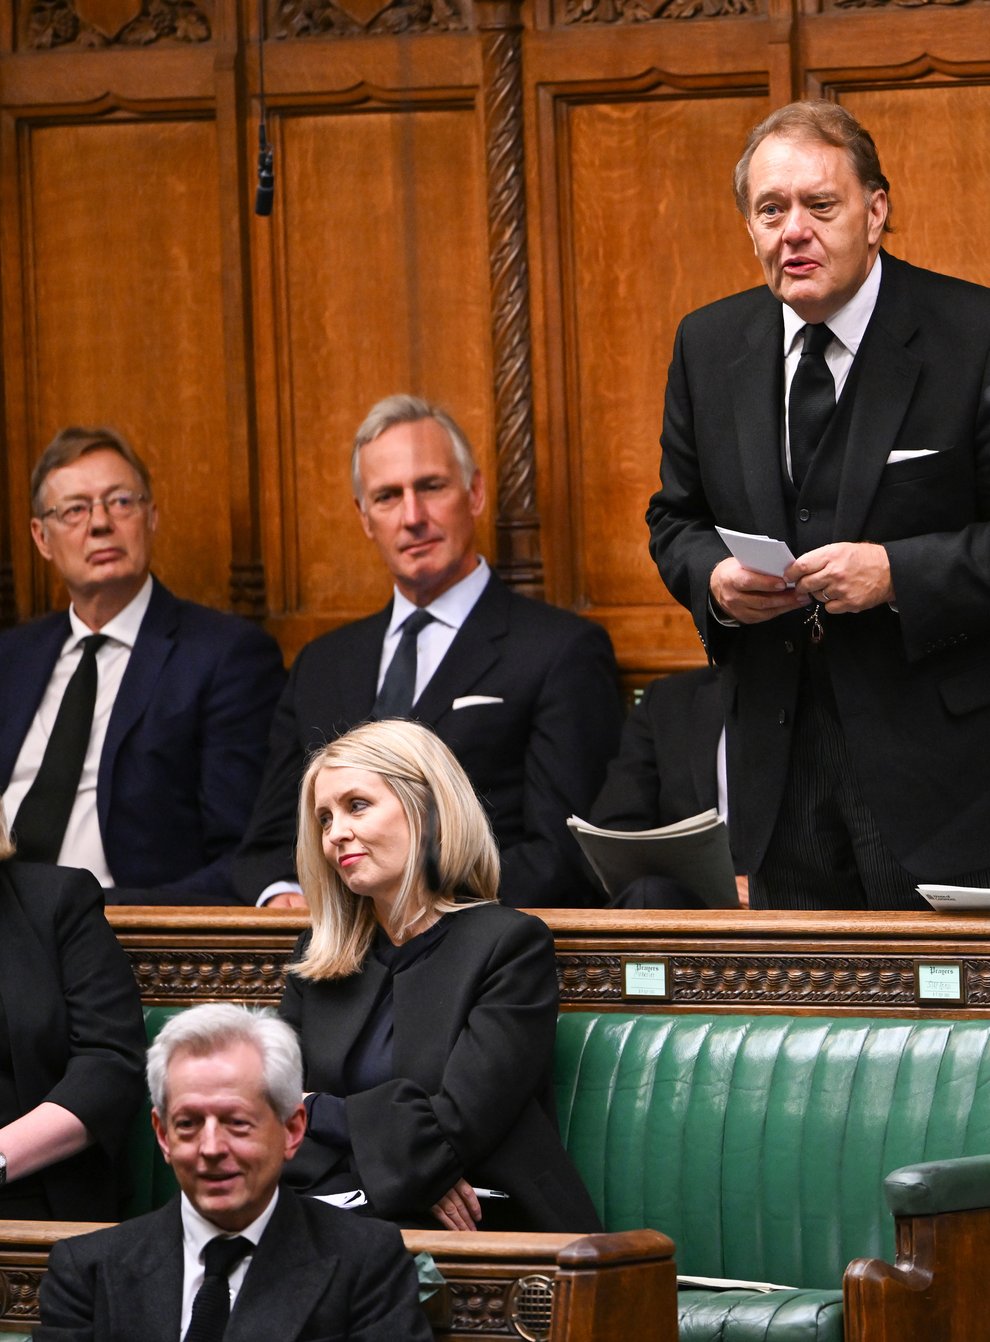 Sir John Hayes giving his tribute to Queen Elizabeth II in the House of Commons. Picture date: Friday September 9, 2022 (UK Parliament/Andy Bailey/PA)